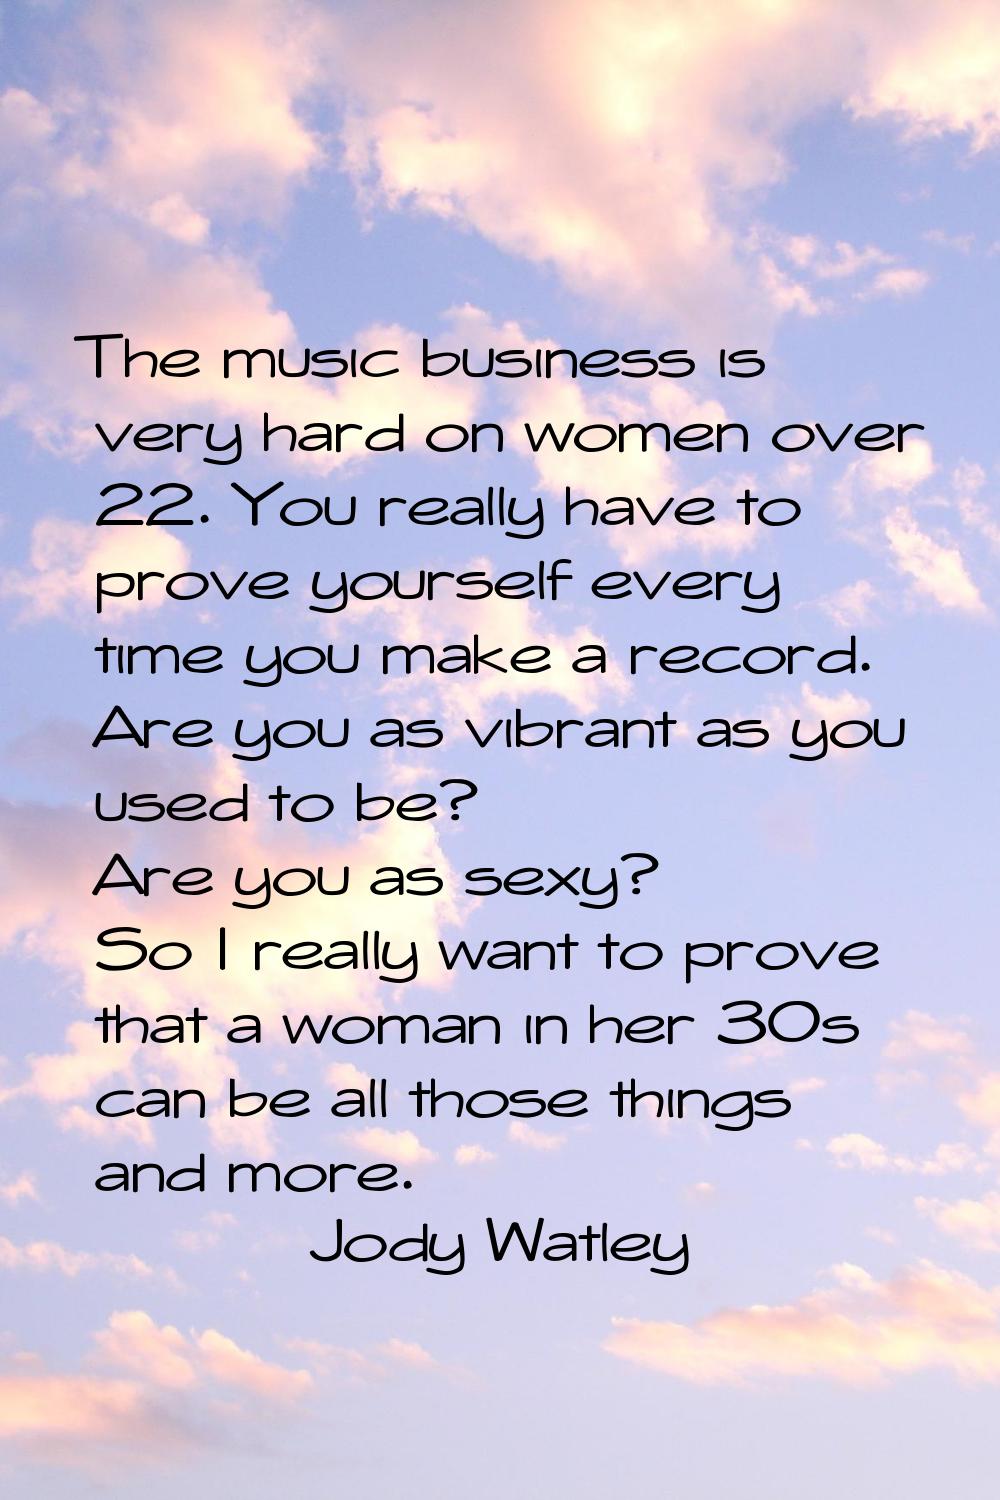 The music business is very hard on women over 22. You really have to prove yourself every time you 